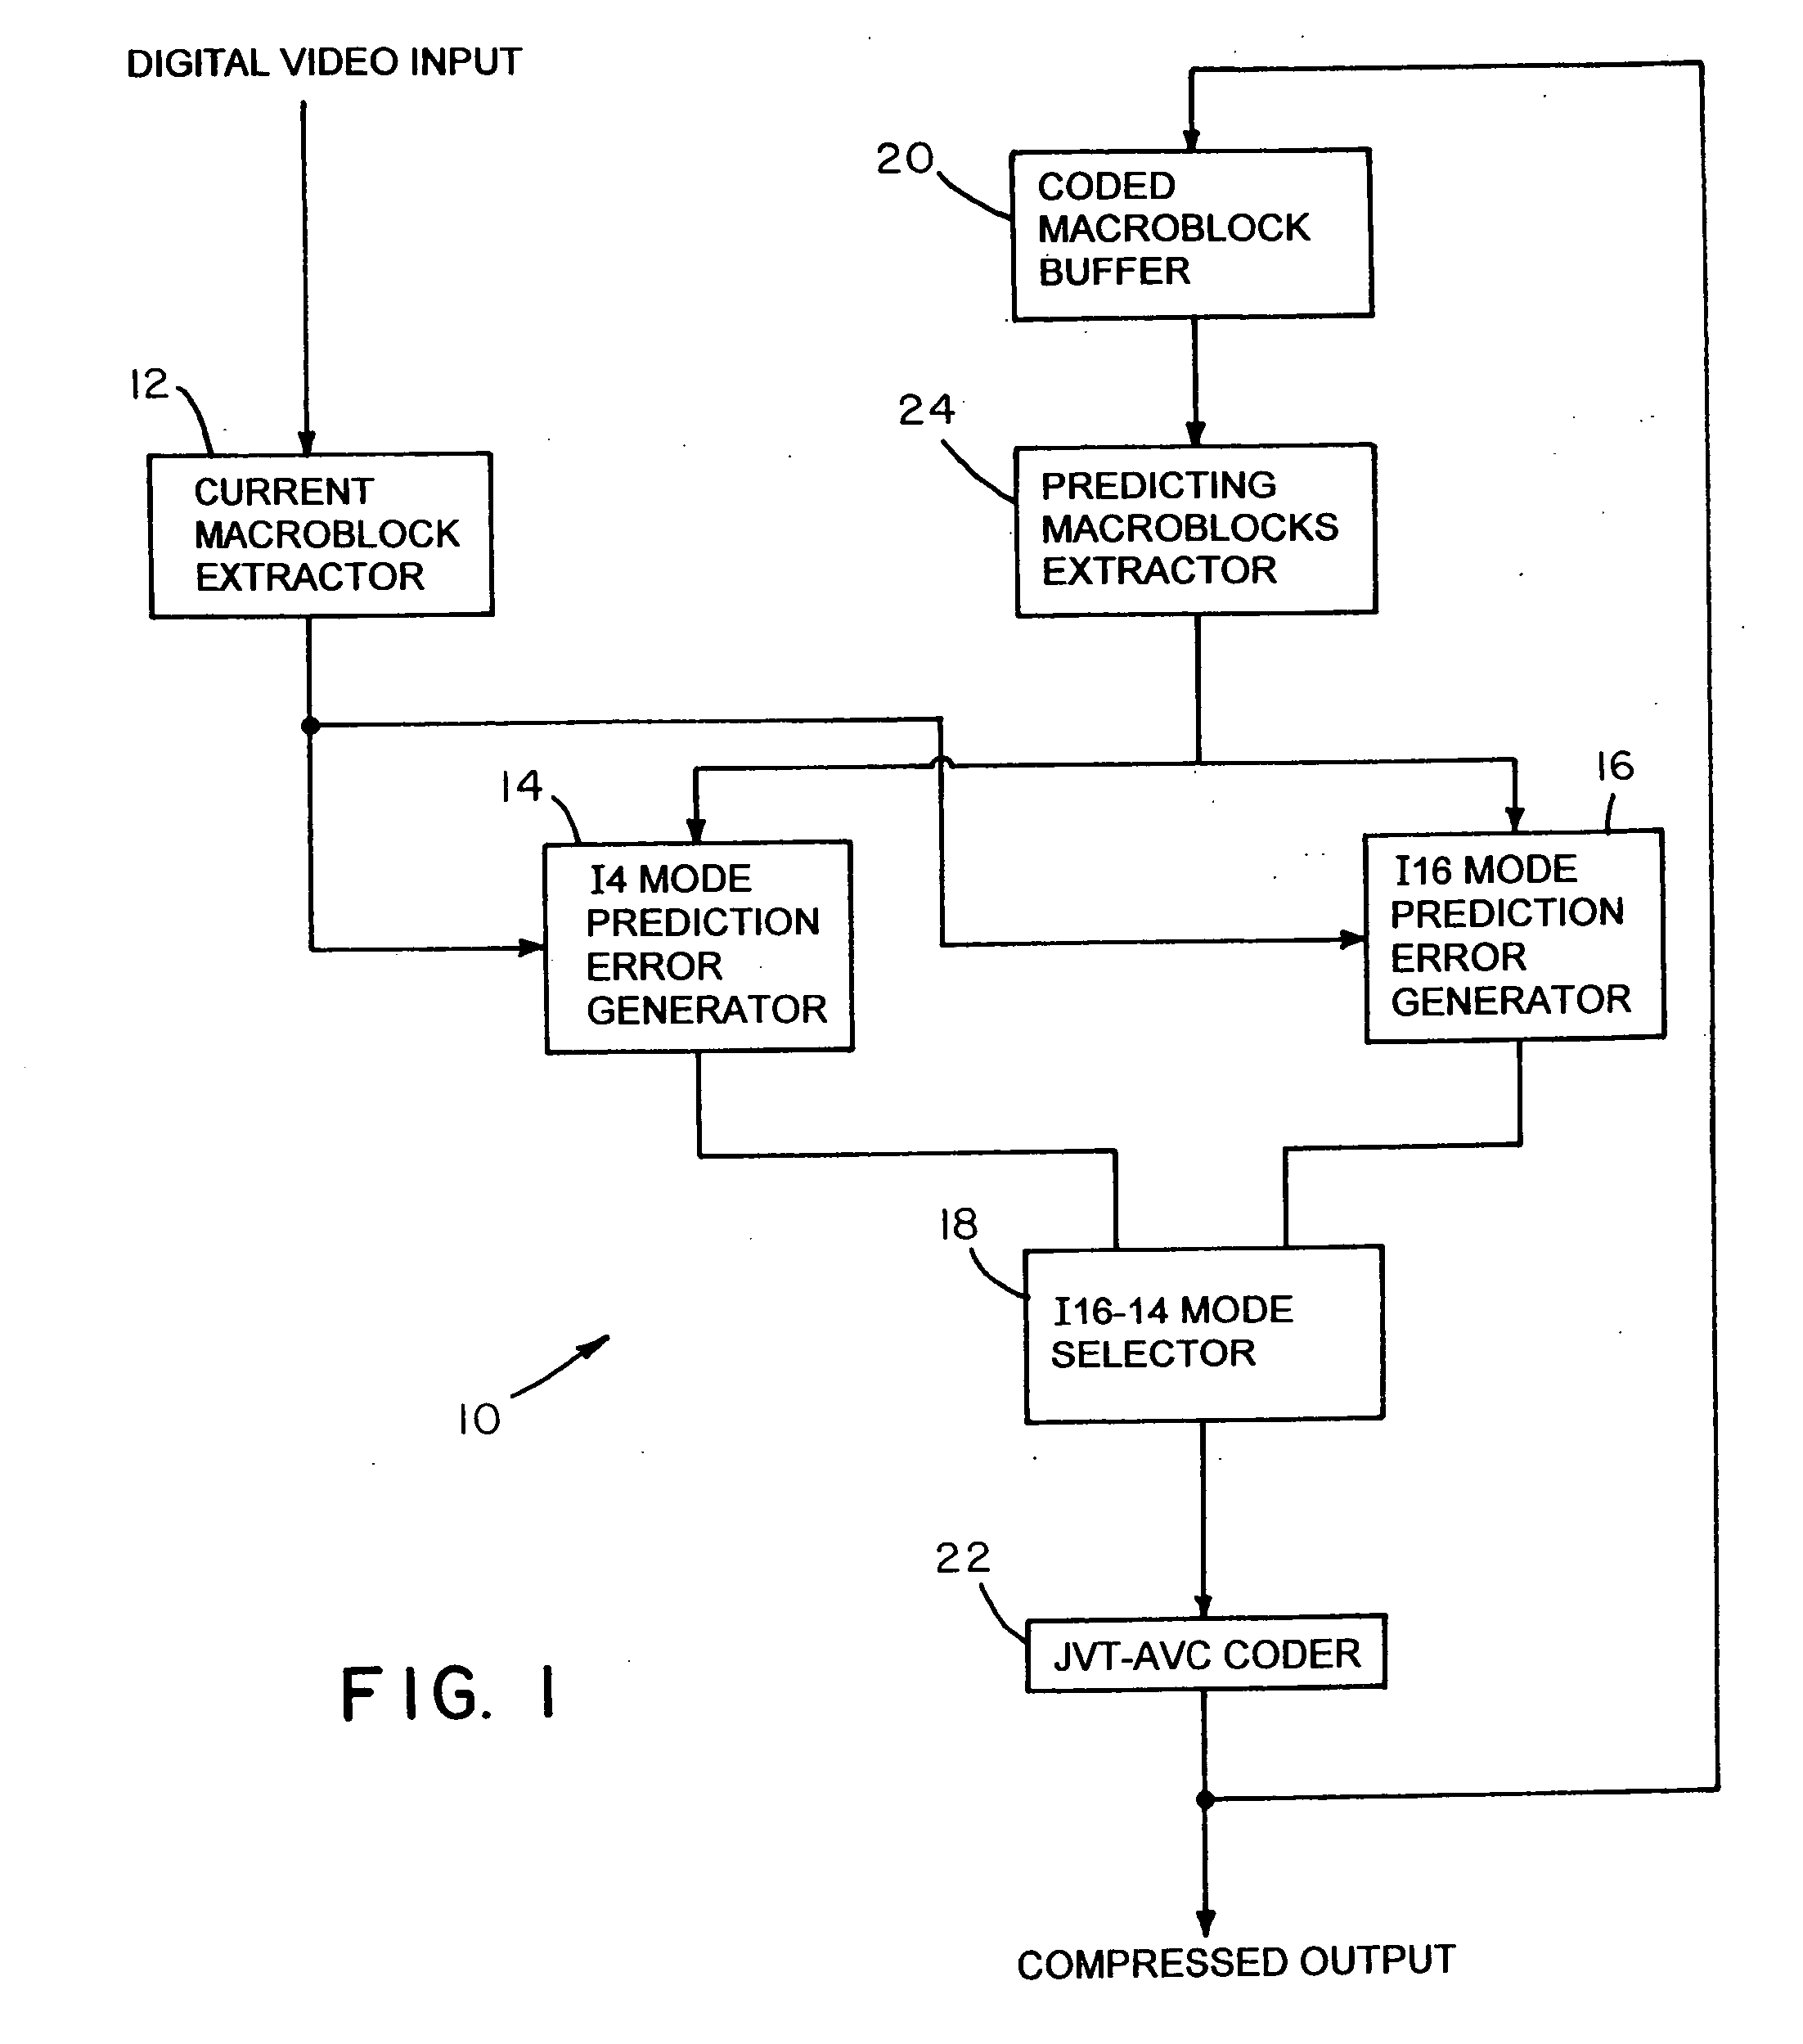 Method and apparatus to determine prediction modes to achieve fast video encoding